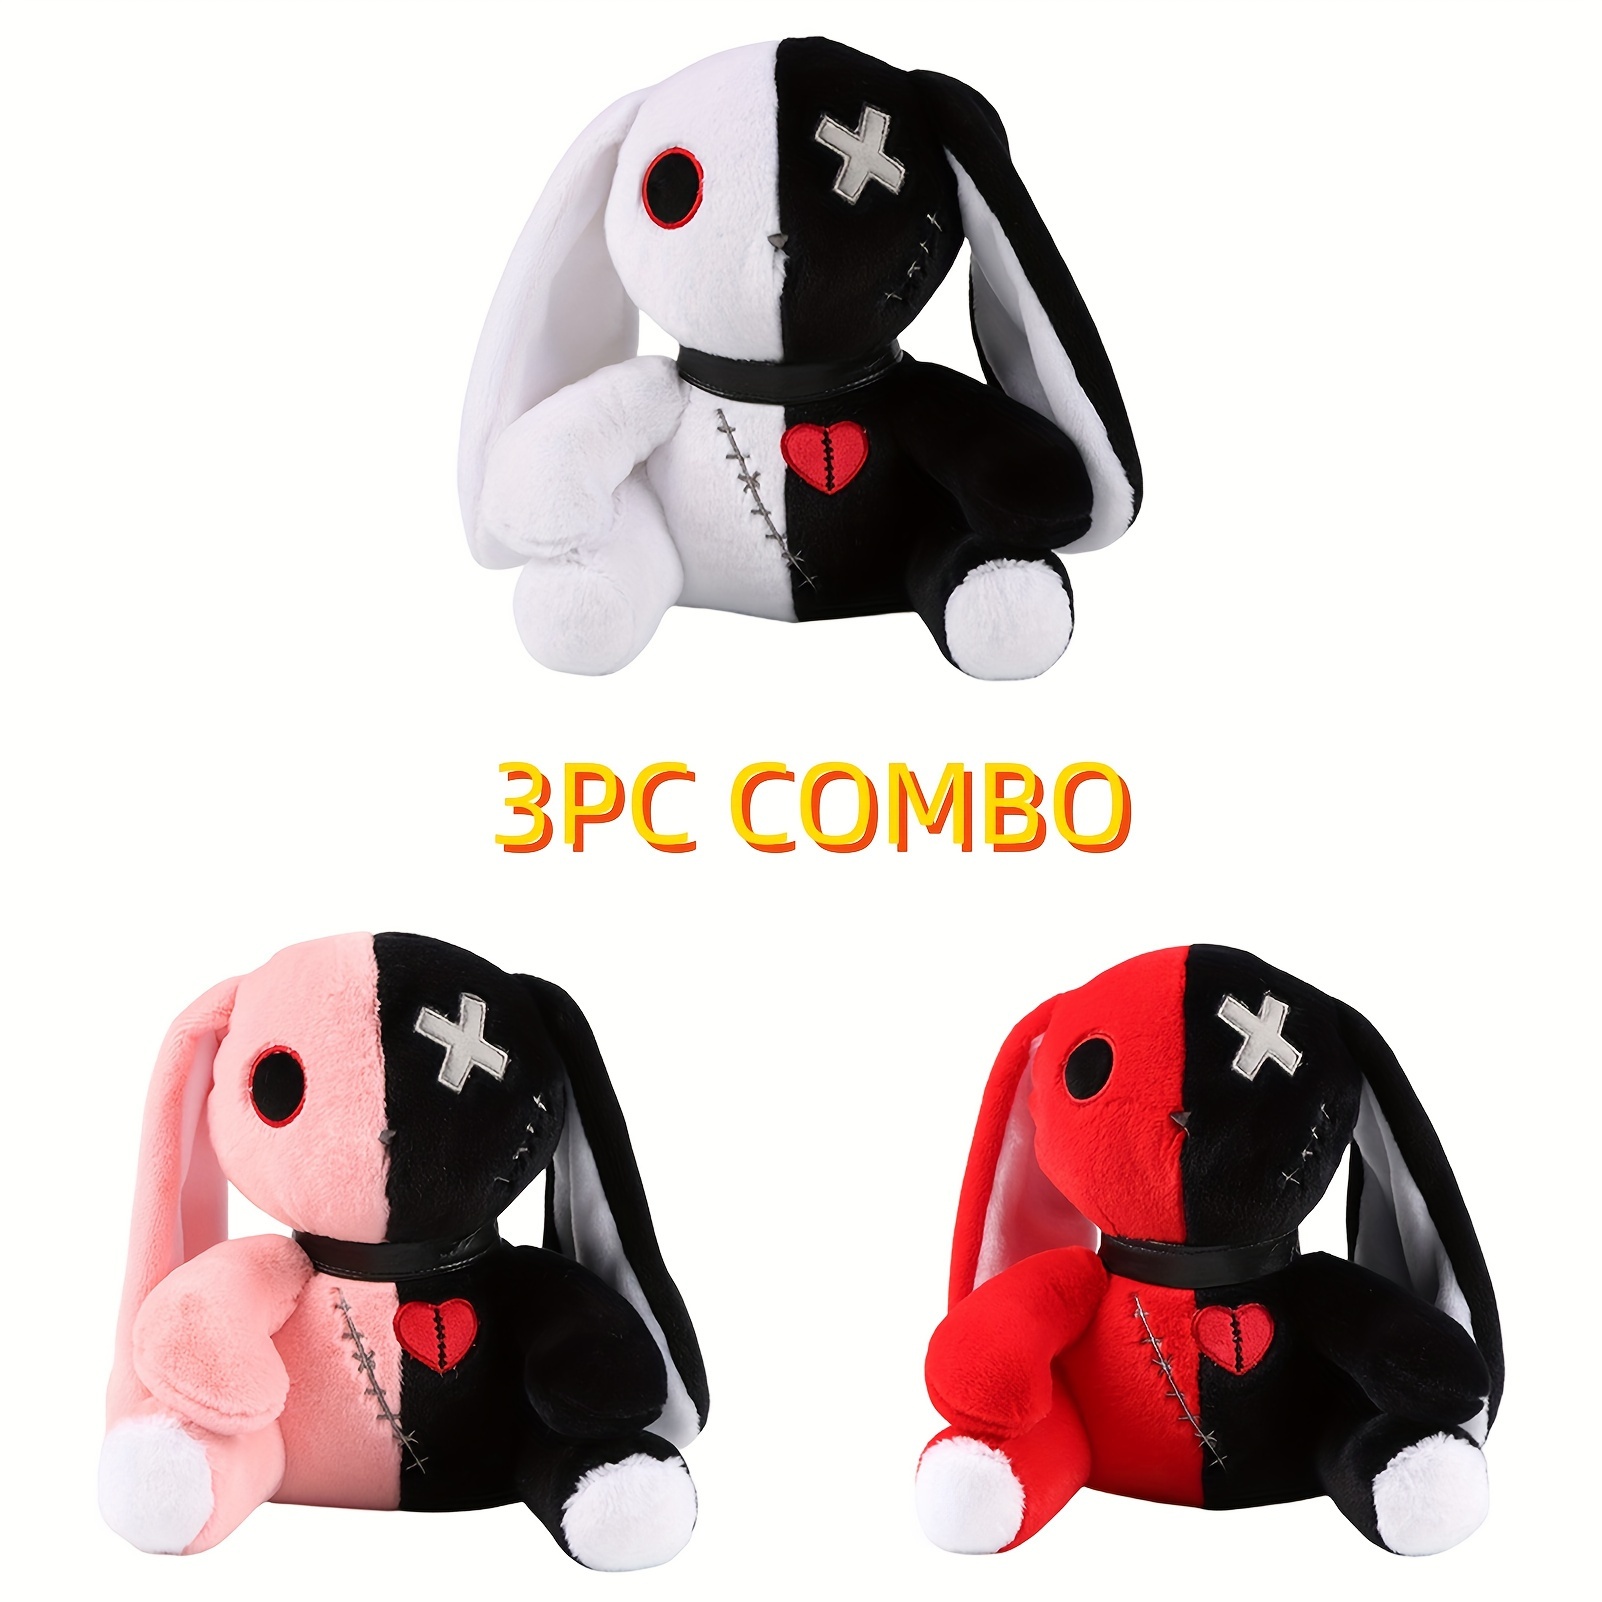 

9.84in 3 Colors Combo Halloween Bunny Plush Spooky Goth Plush Crazy Bunny Plush Bunny Halloween Dreadful Bunny Stuffed Easter Rabbit Animal Pillow Soft Pink Rabbit Huggable Lovely Bunny Dolls Gifts